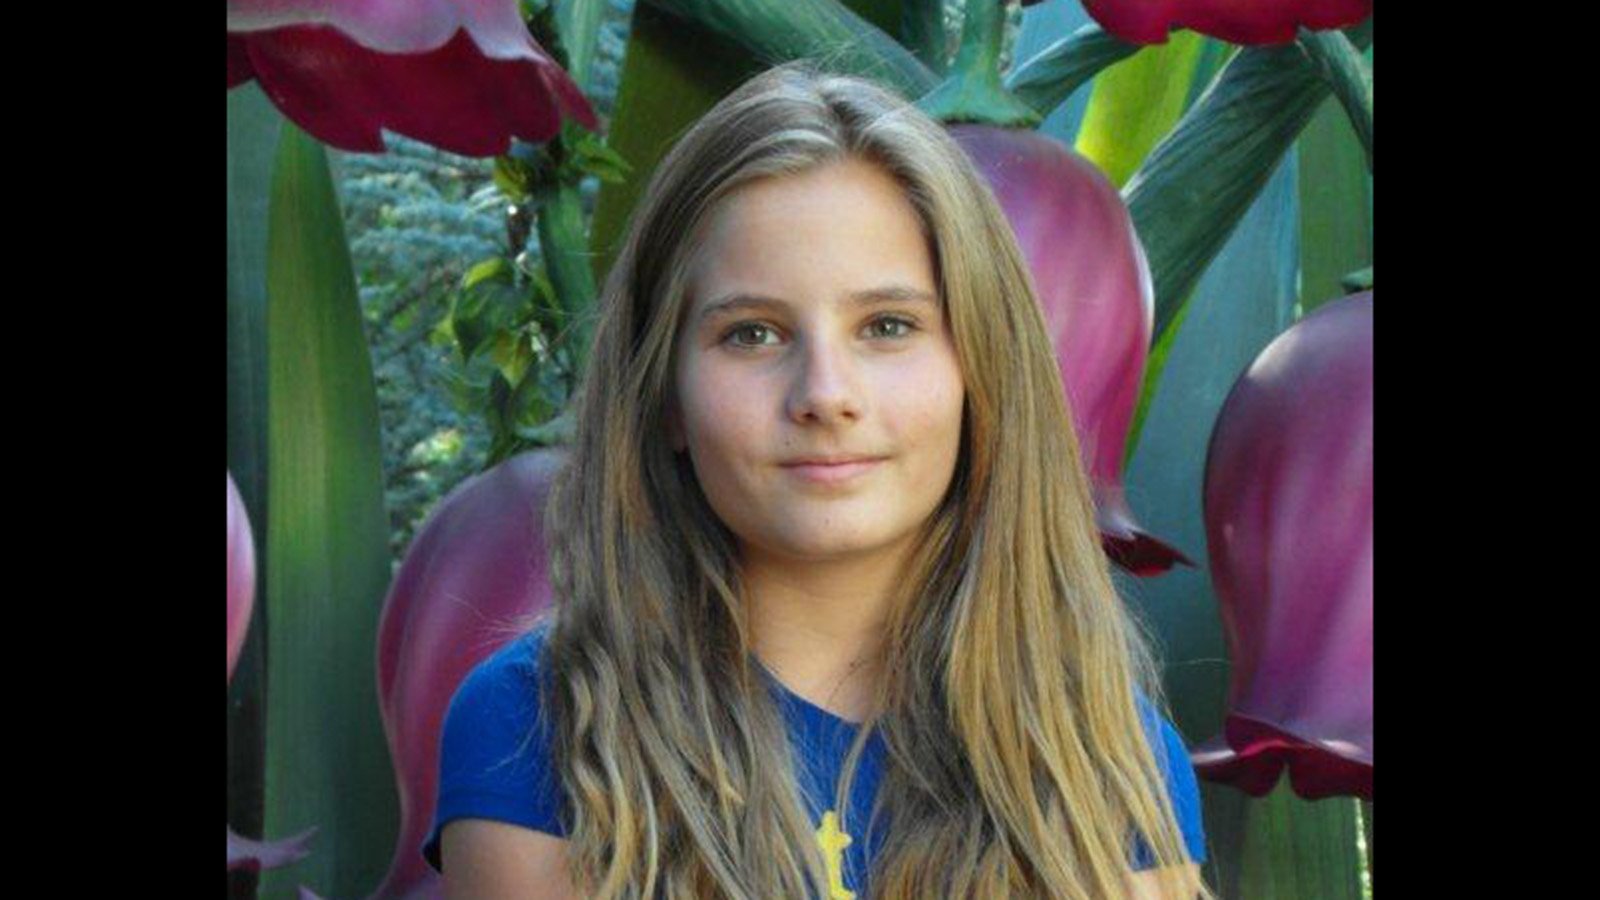 In June 2013, Brooklynn Mohler, 13, was unintentionally shot and killed by her best friend. Brooklynn's parents are on a crusade to save other children and families from their pain. Brooklynn loved Disneyland. This shot was taken during a surprise mommy-daughter weekend to the park in February 2012.